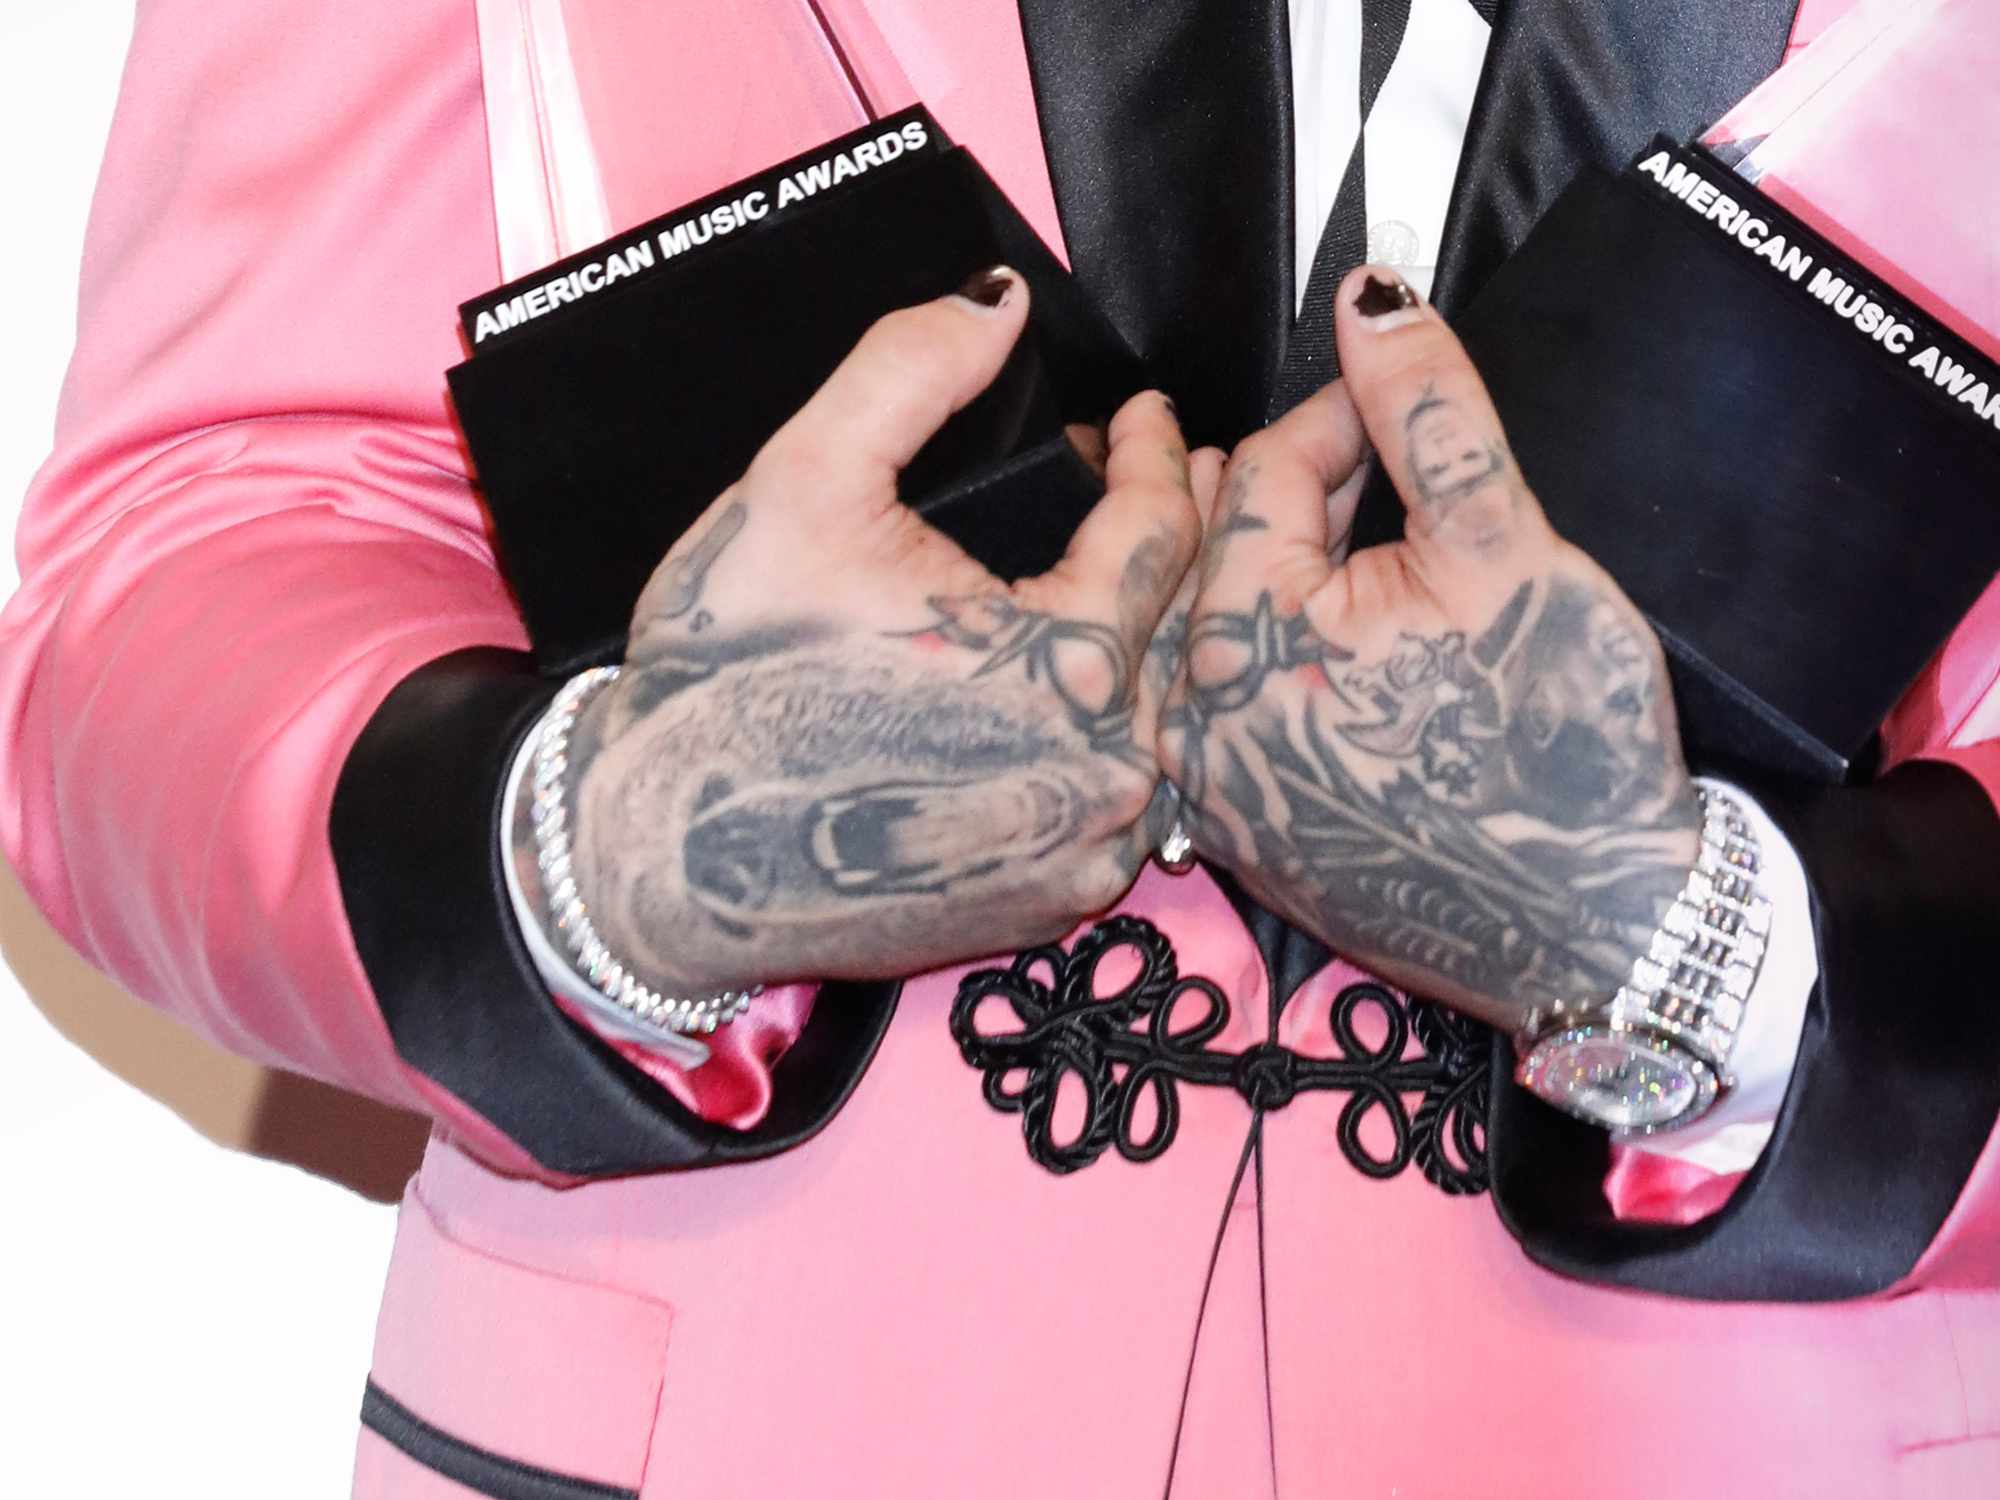 Post Malone (tattoo detail) photographed in the press room of the 2018 American Music Awards at the Microsoft Theater on October 9, 2018 in Los Angeles, California